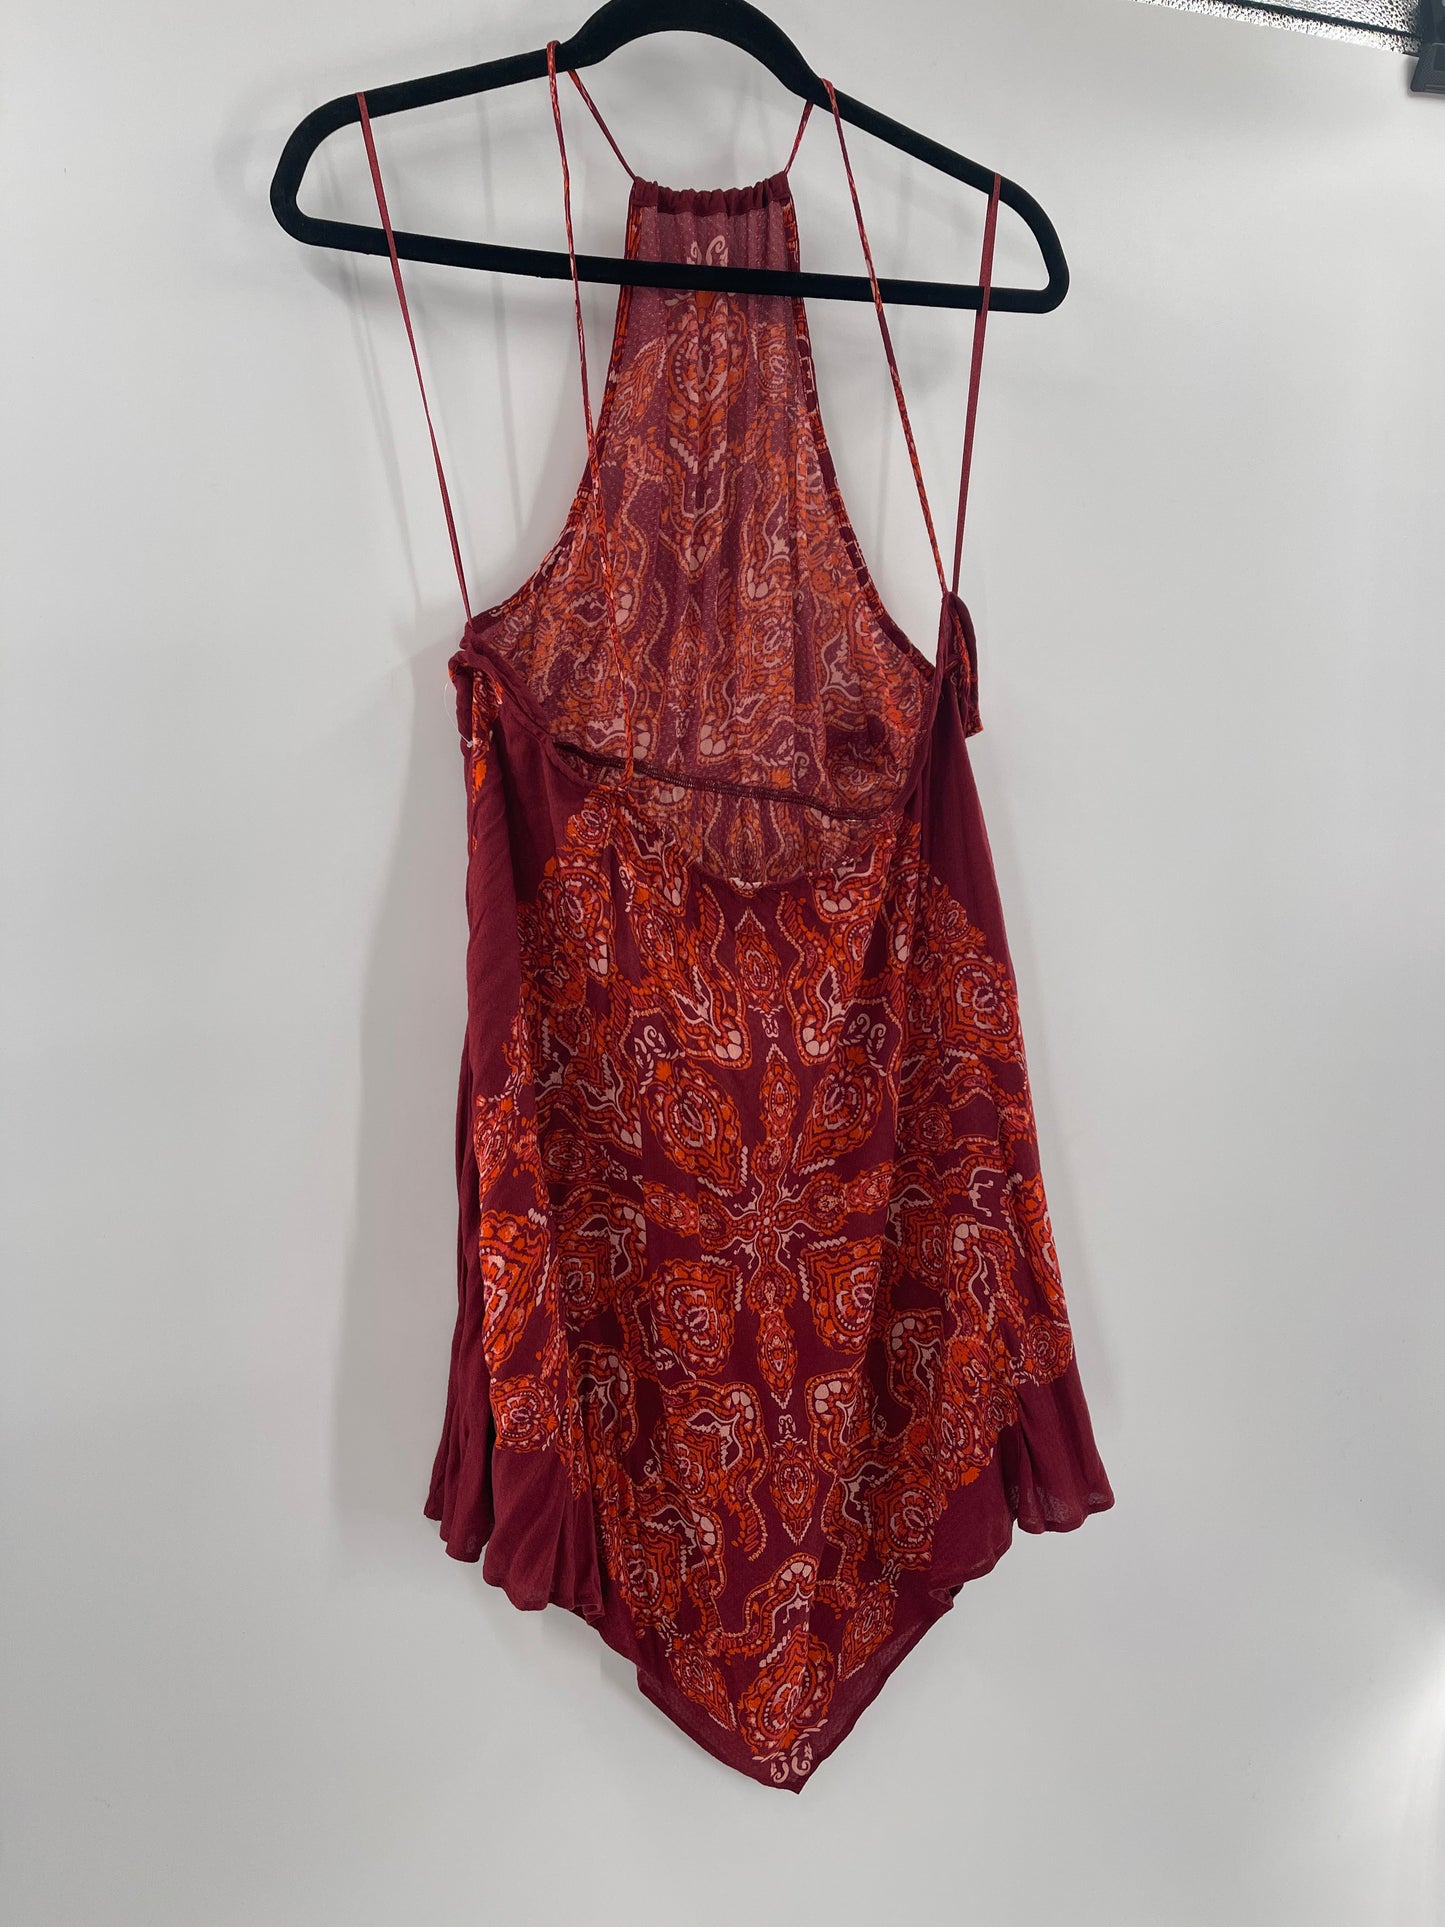 Free People Intimately Floral Red Sleeveless Spaghetti Straps Backless Mini Dress (Size L)